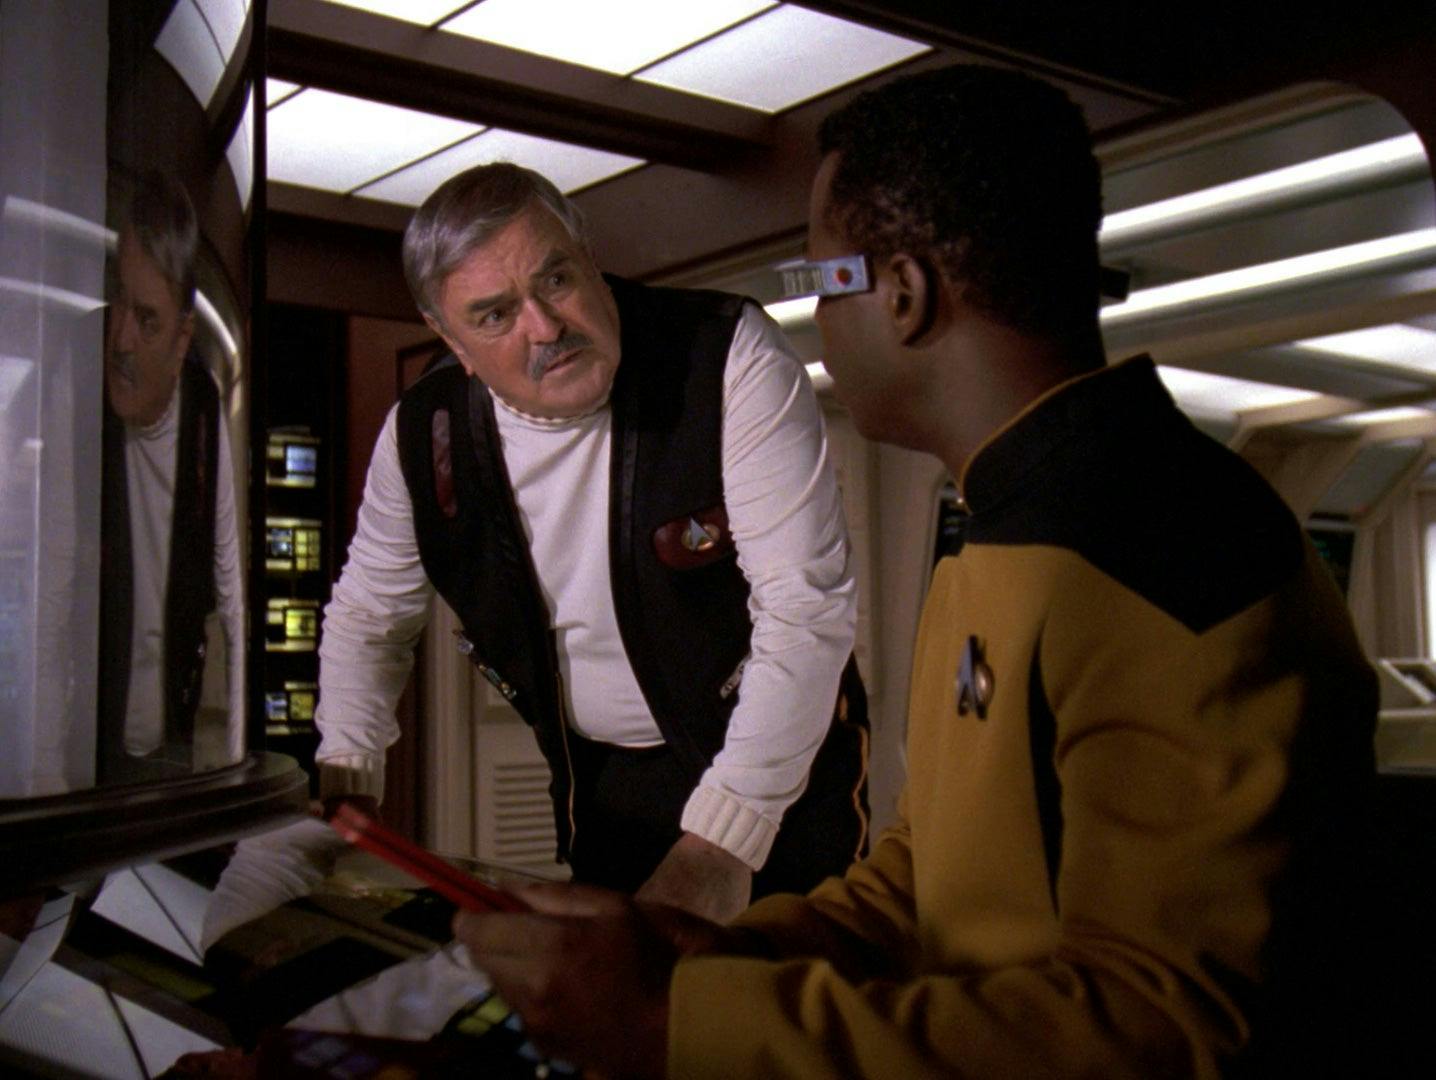 Scotty stands next to Geordi La Forge in engineering aboard the Enterprise-D.